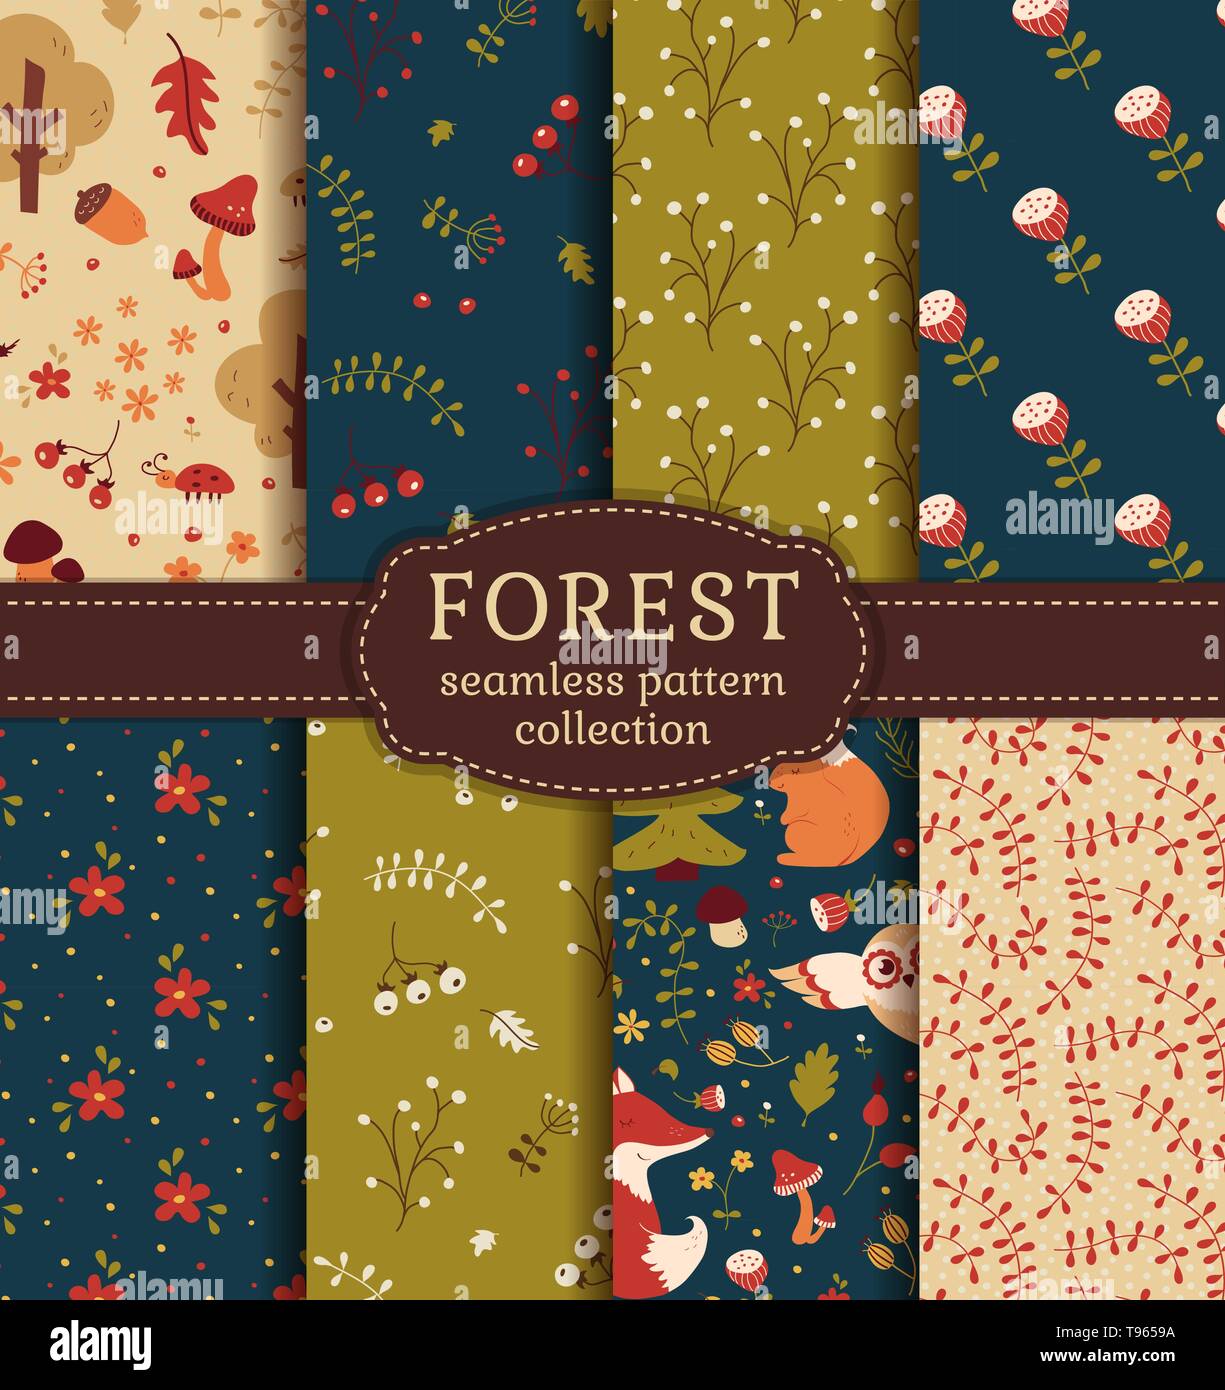 Forest seamless patterns with hand drawn animals, flowers and plants. Set of cute nature textiles in blue, green, red and beige colors. Vector. Stock Vector